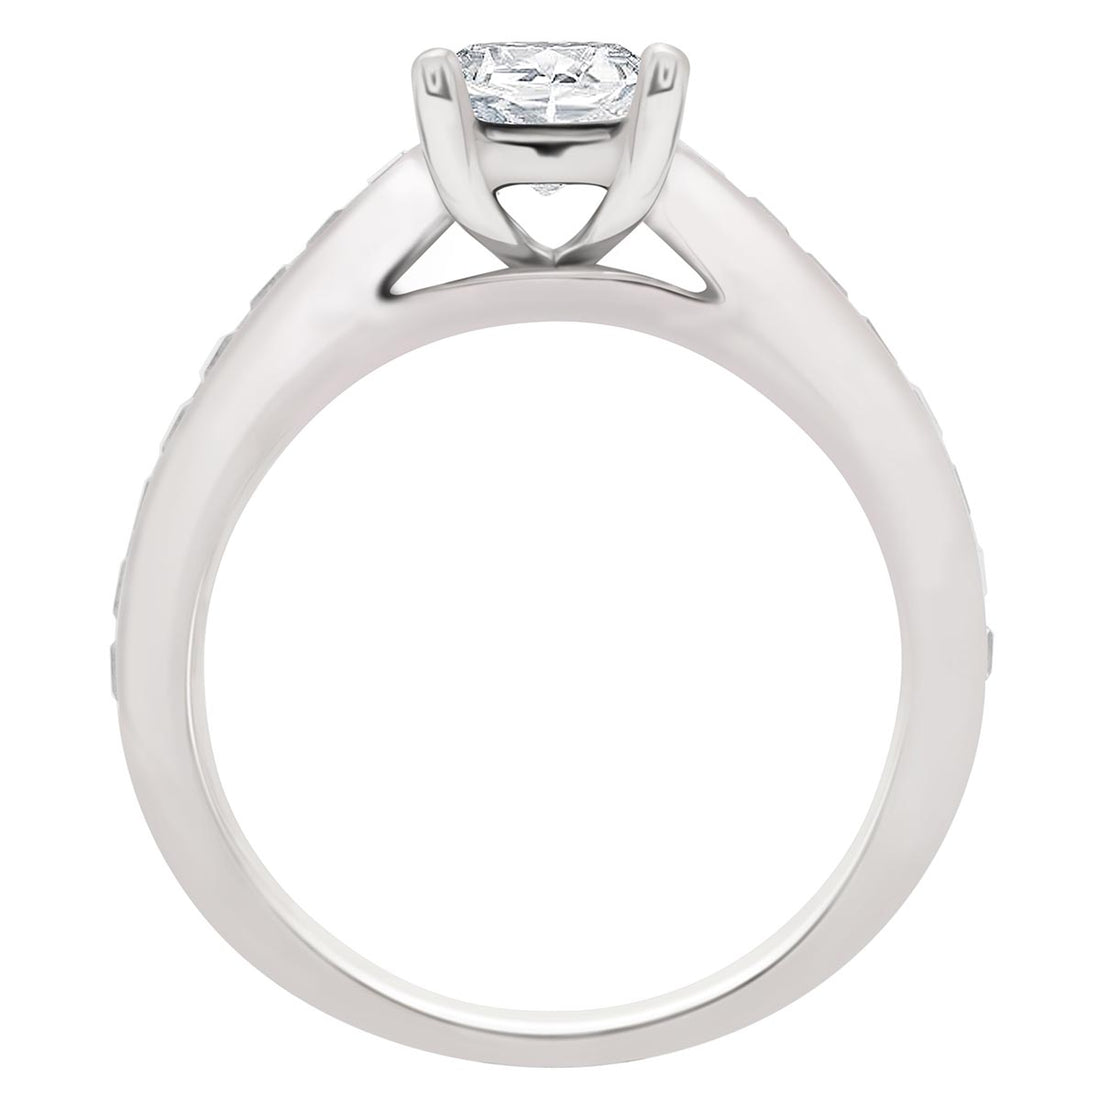 Princess Shape Diamond Ring made from white gold standing upright